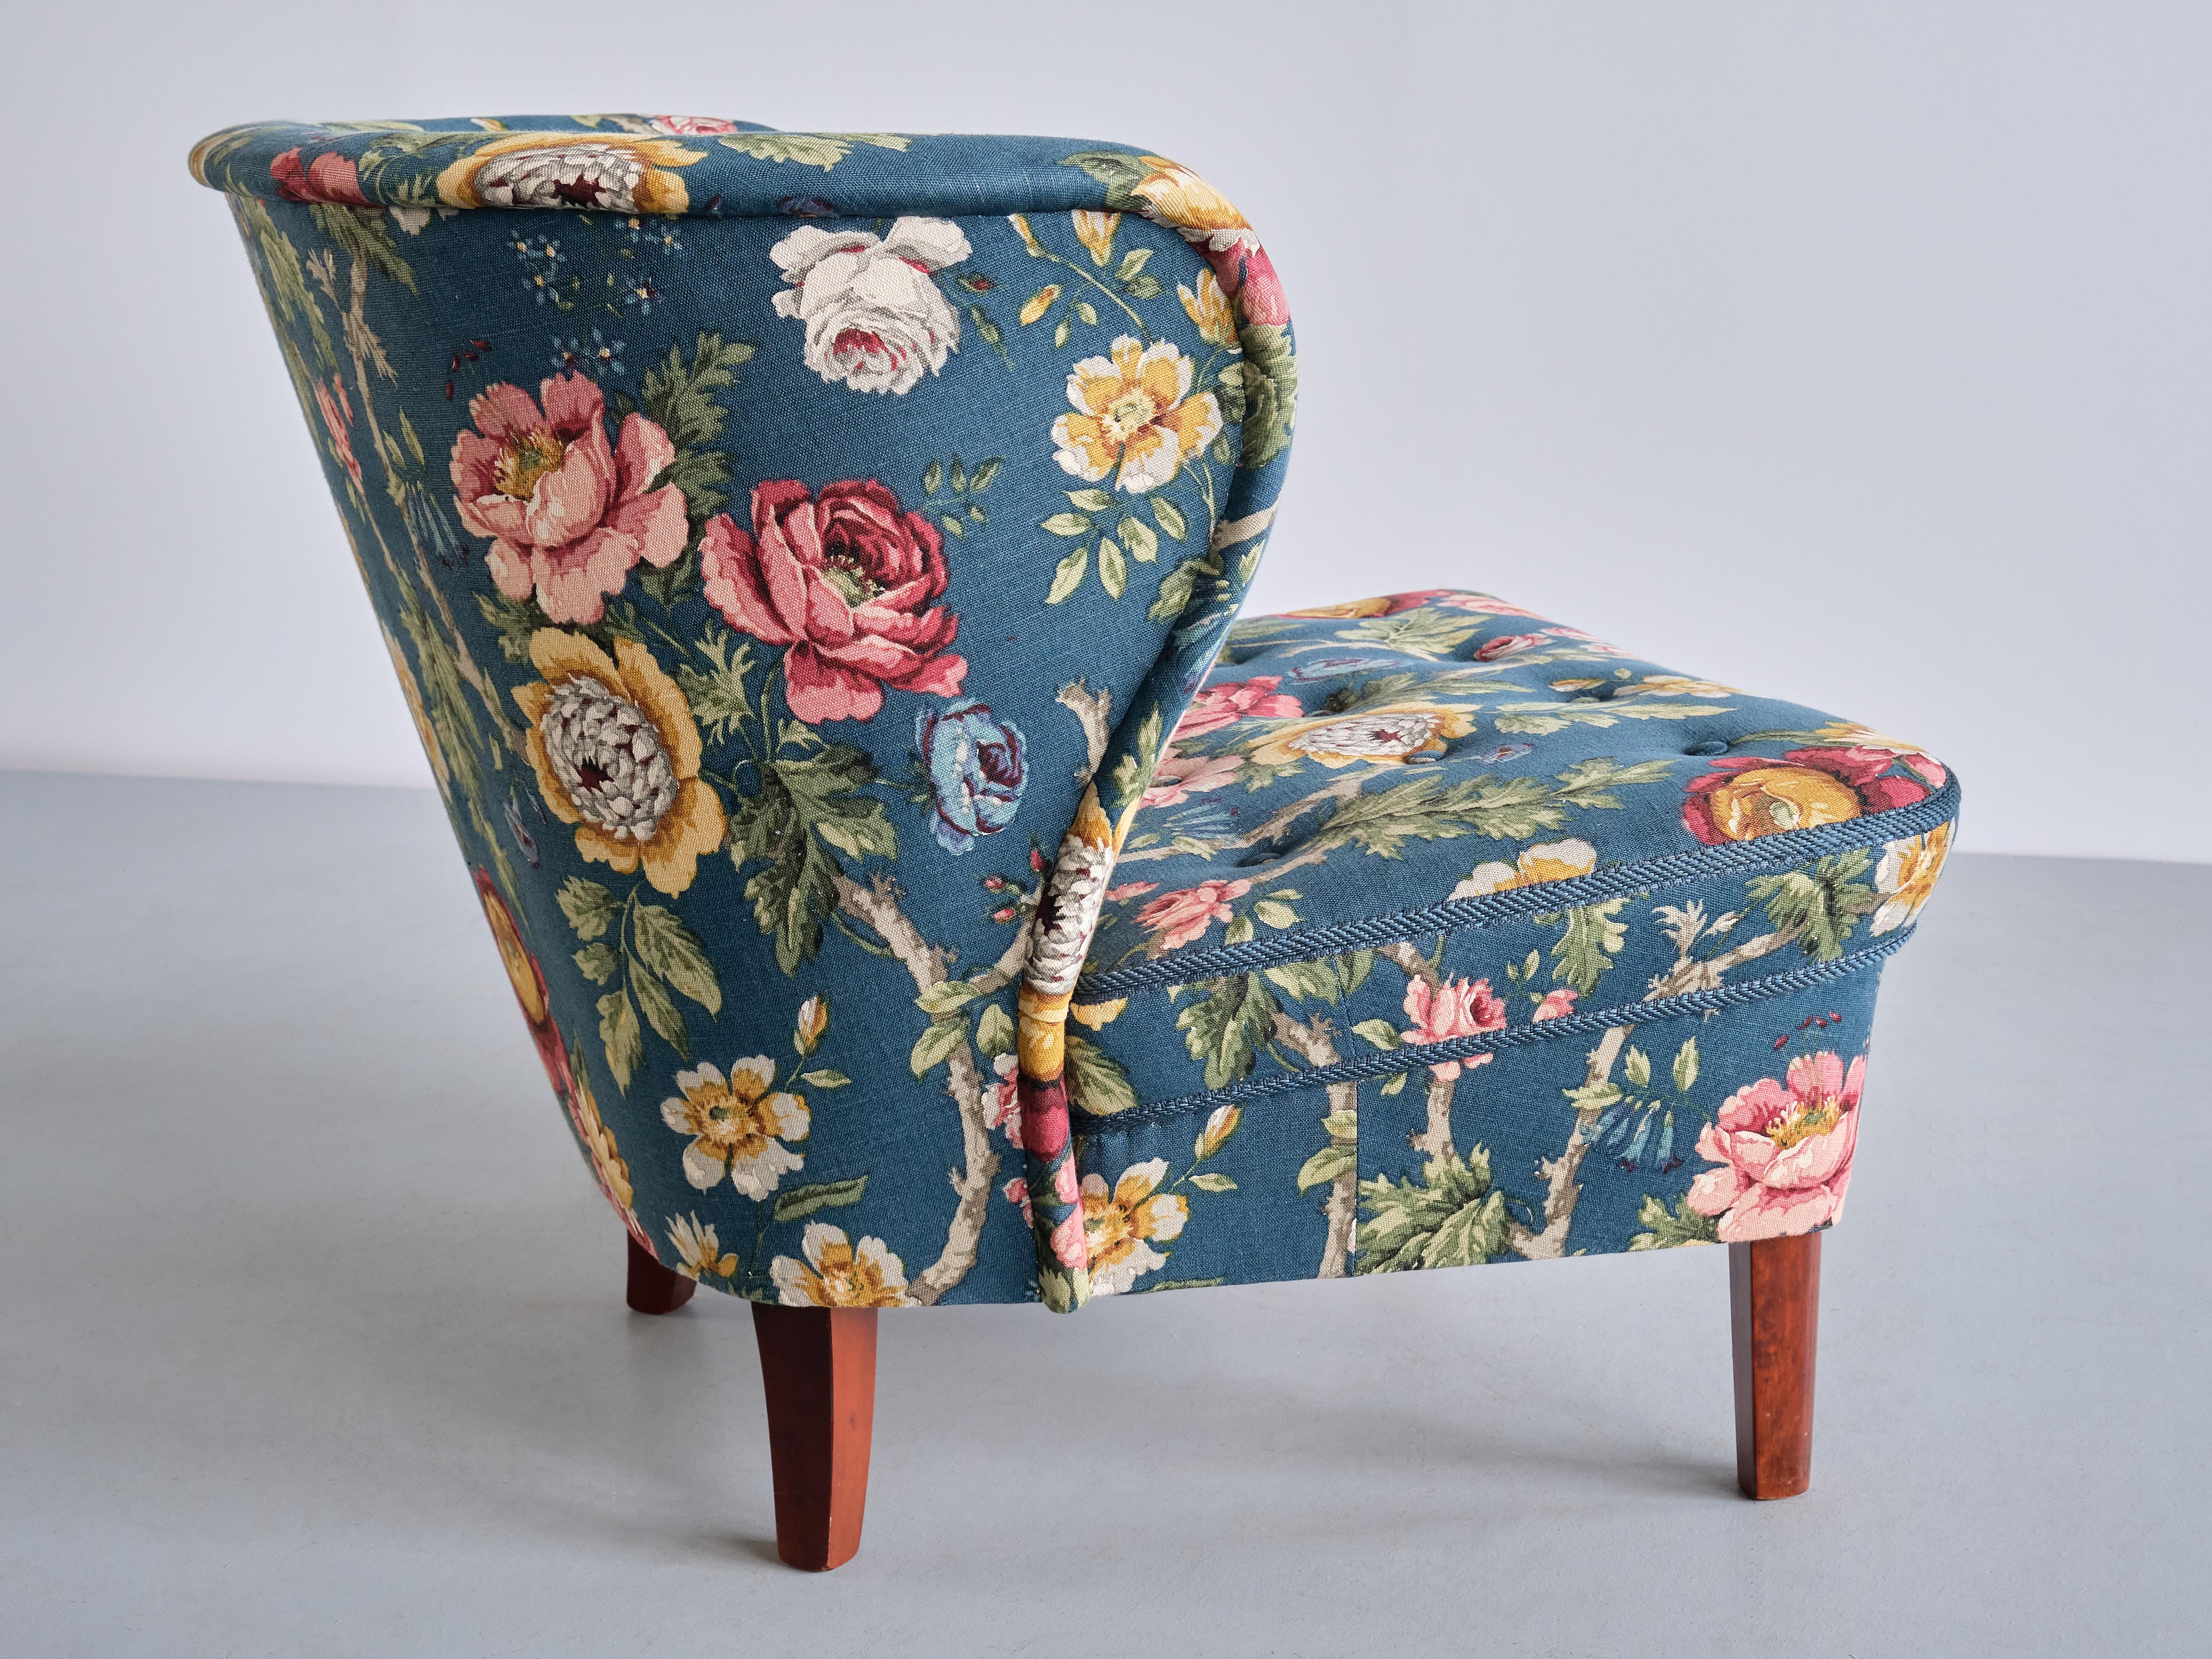 Gösta Jonsson Lounge Chair in Floral Fabric and Birch, Sweden, 1940s For Sale 1